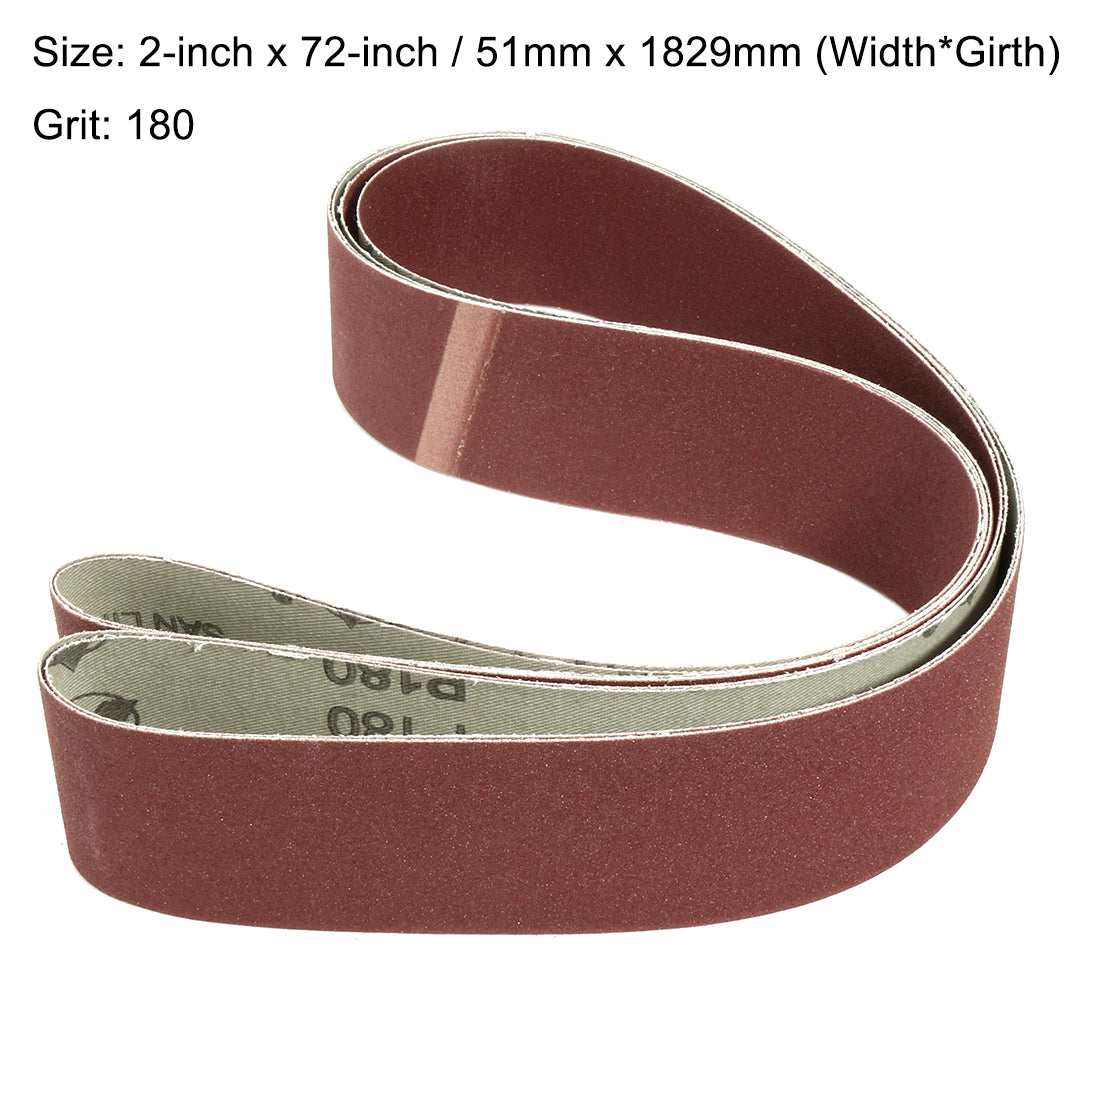 uxcell Uxcell 2-Inch x 72-Inch Aluminum Oxide Sanding Belt 180 Grits Lapped Joint 2pcs